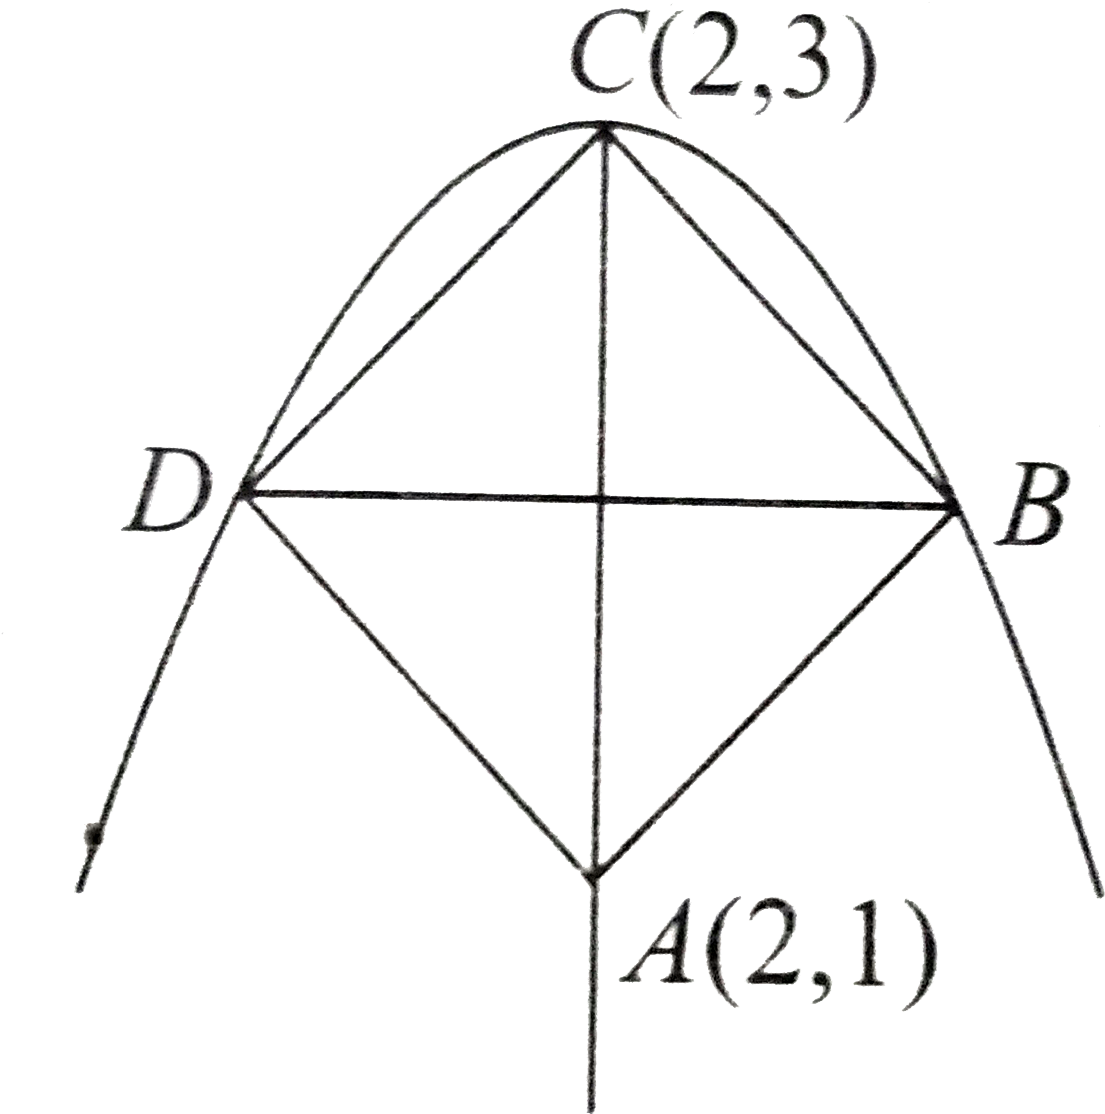 A Diagram Of A Triangle With Lines And Letters